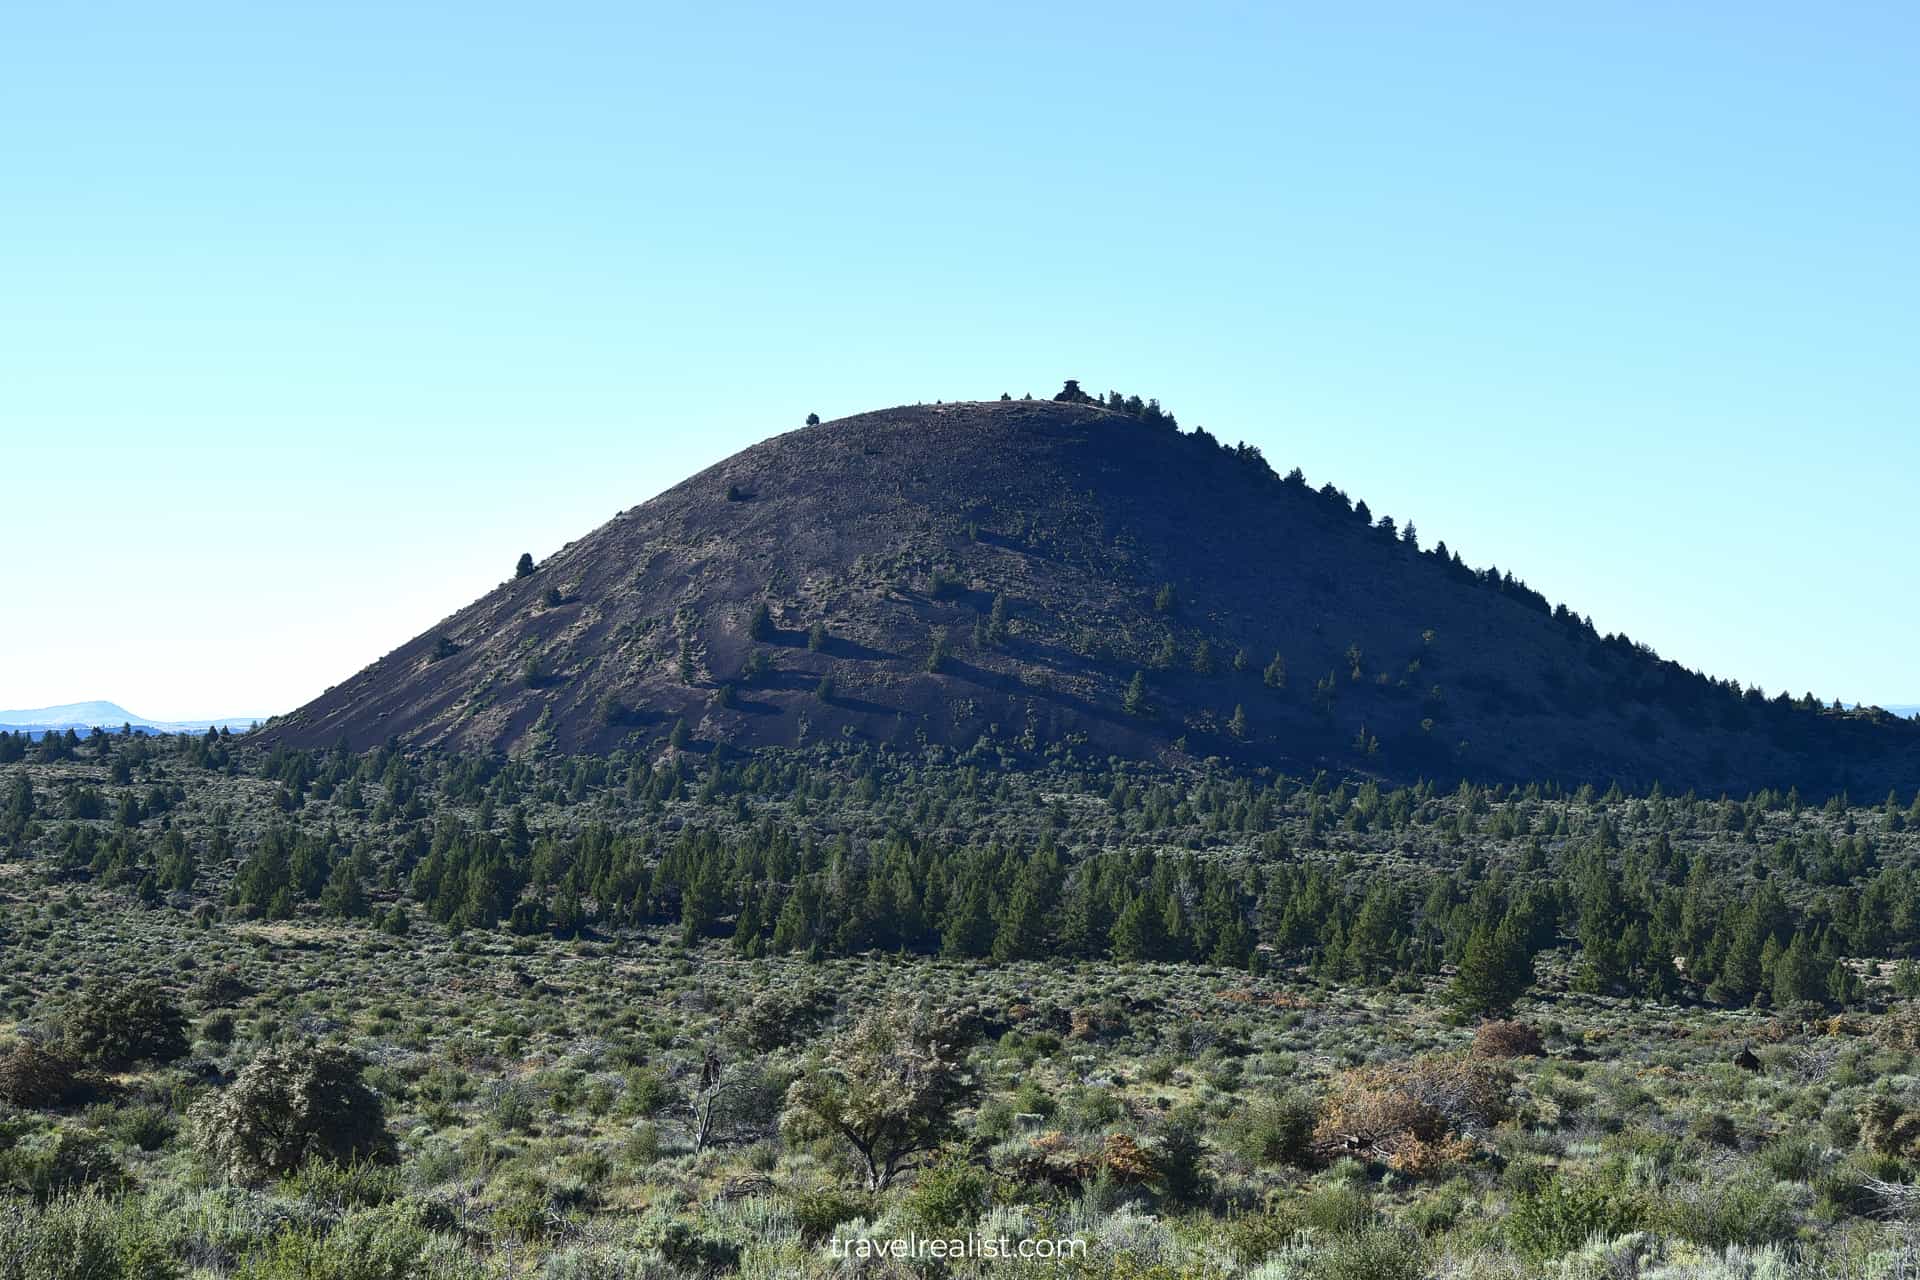 Schonchin Butte in Lava Beds National Monument, California, US